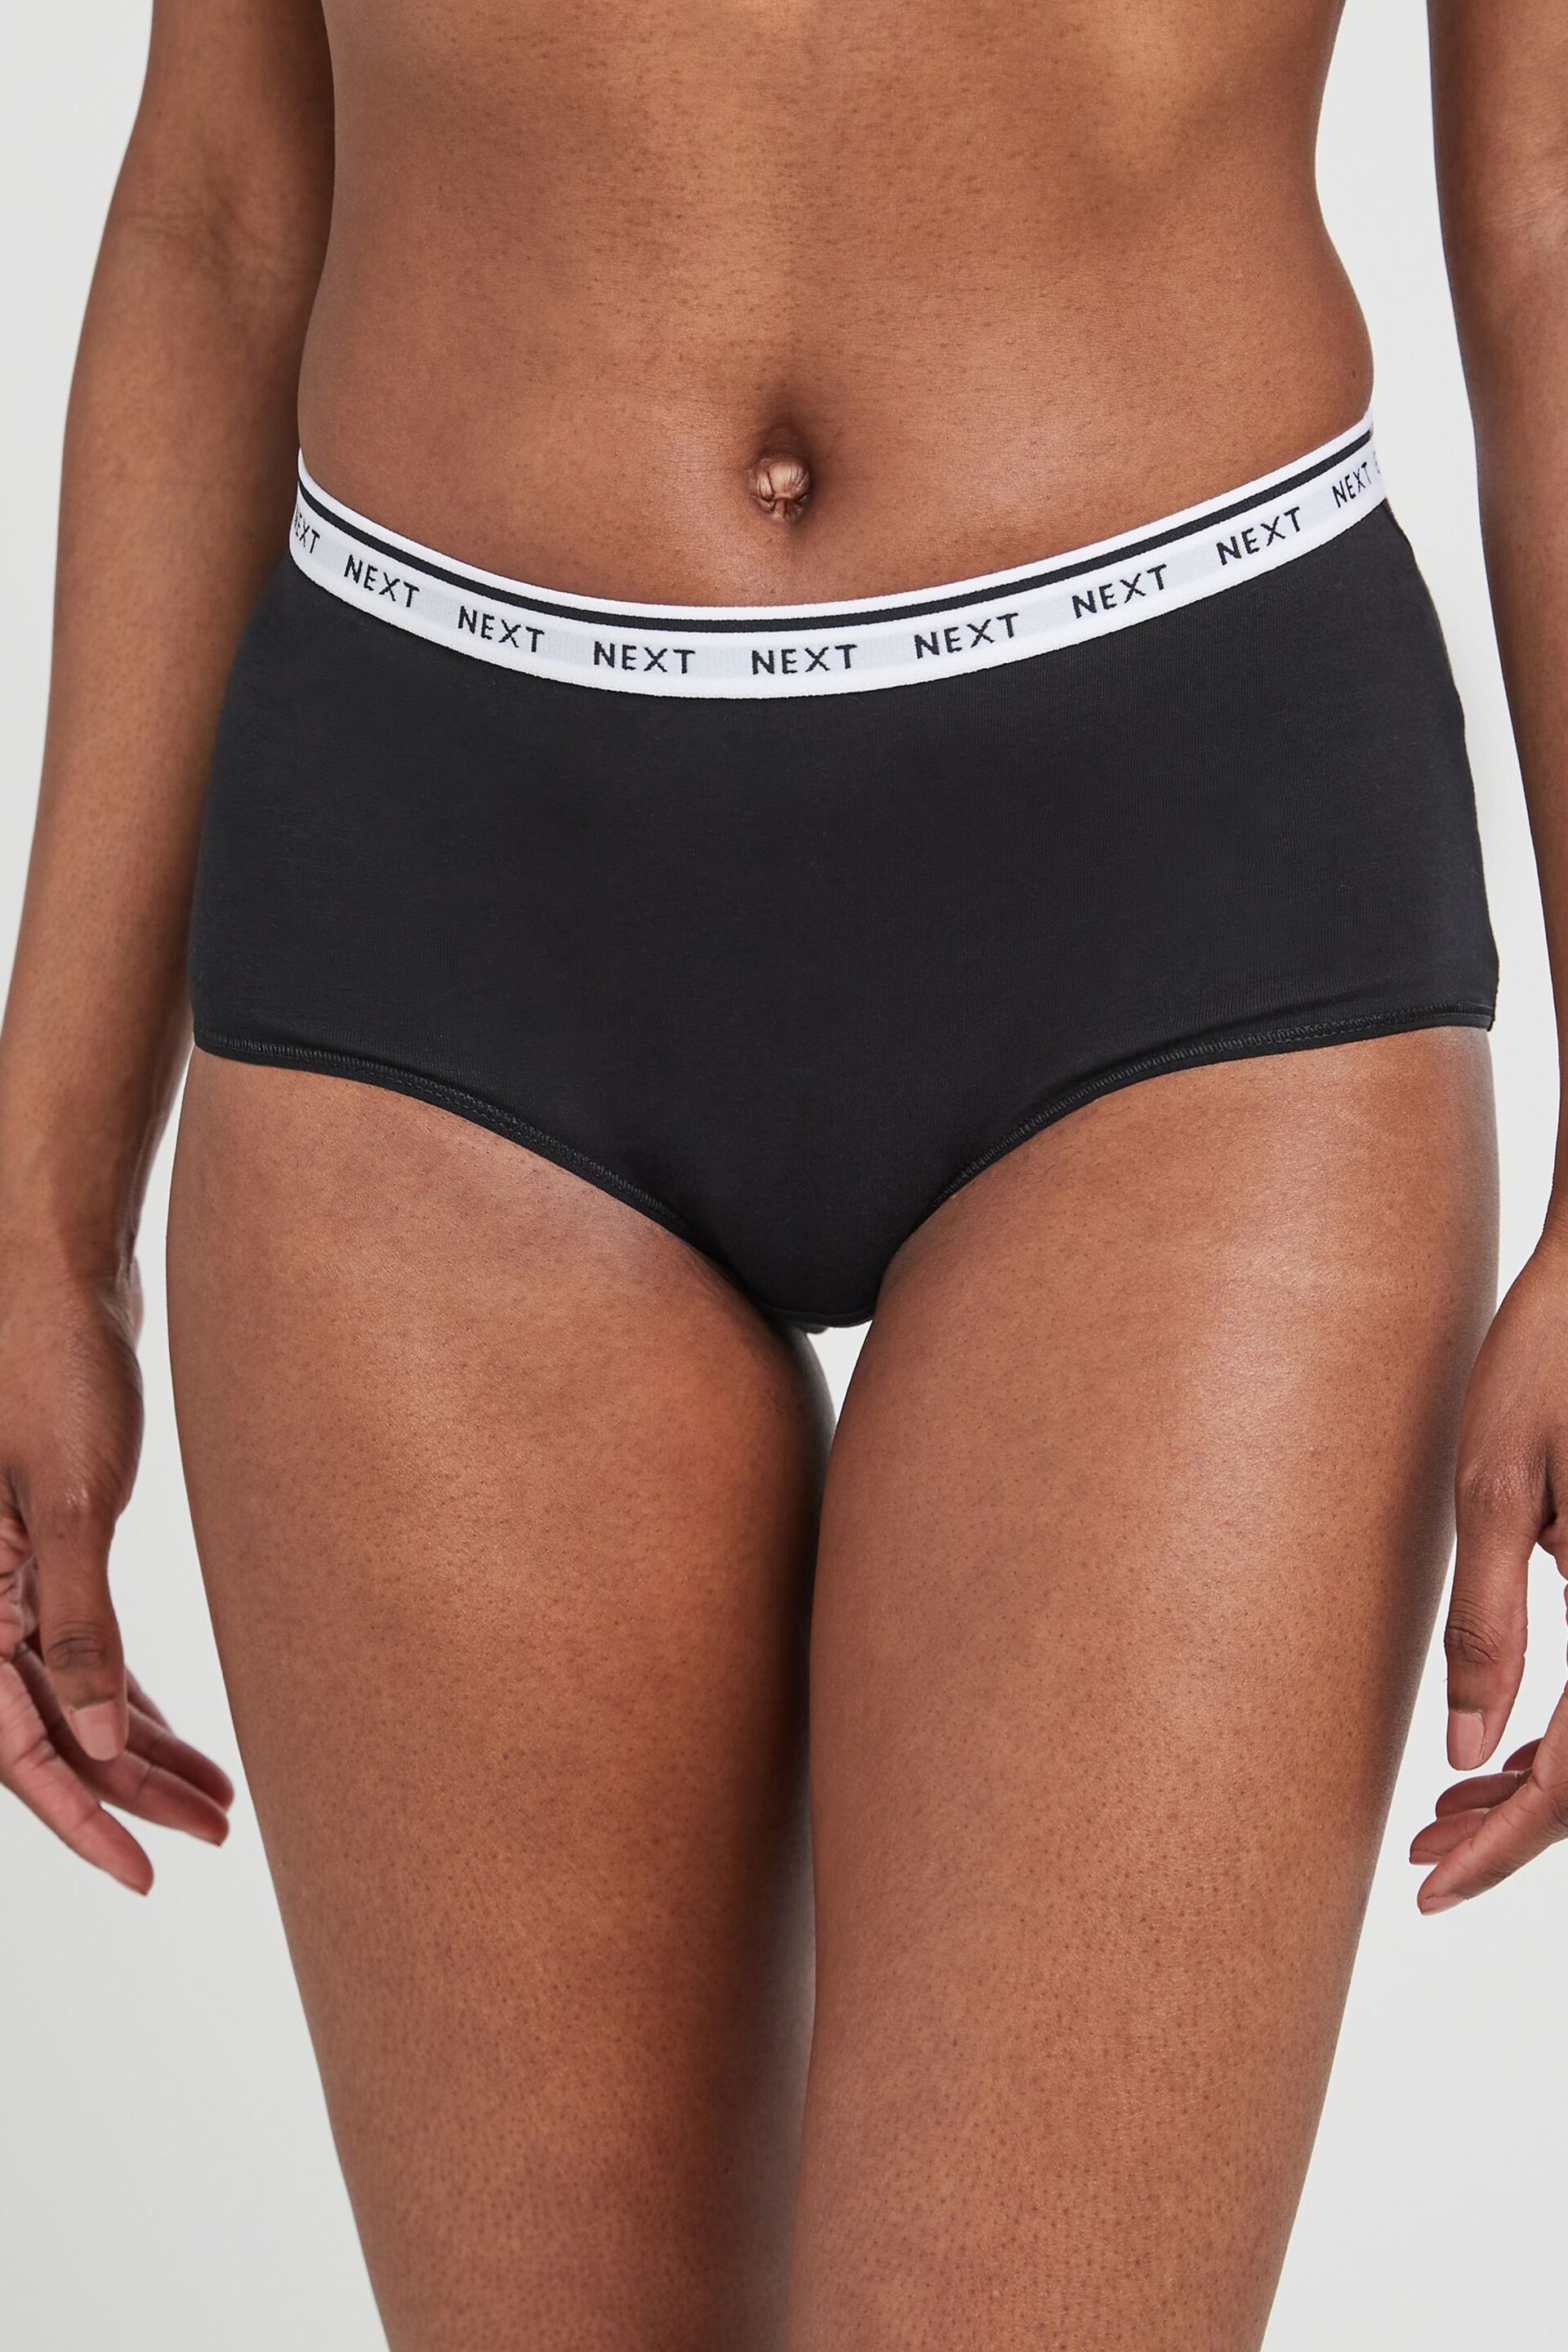 White/Black/Grey Midi Cotton Rich Logo Knickers 4 Pack - Image 5 of 8